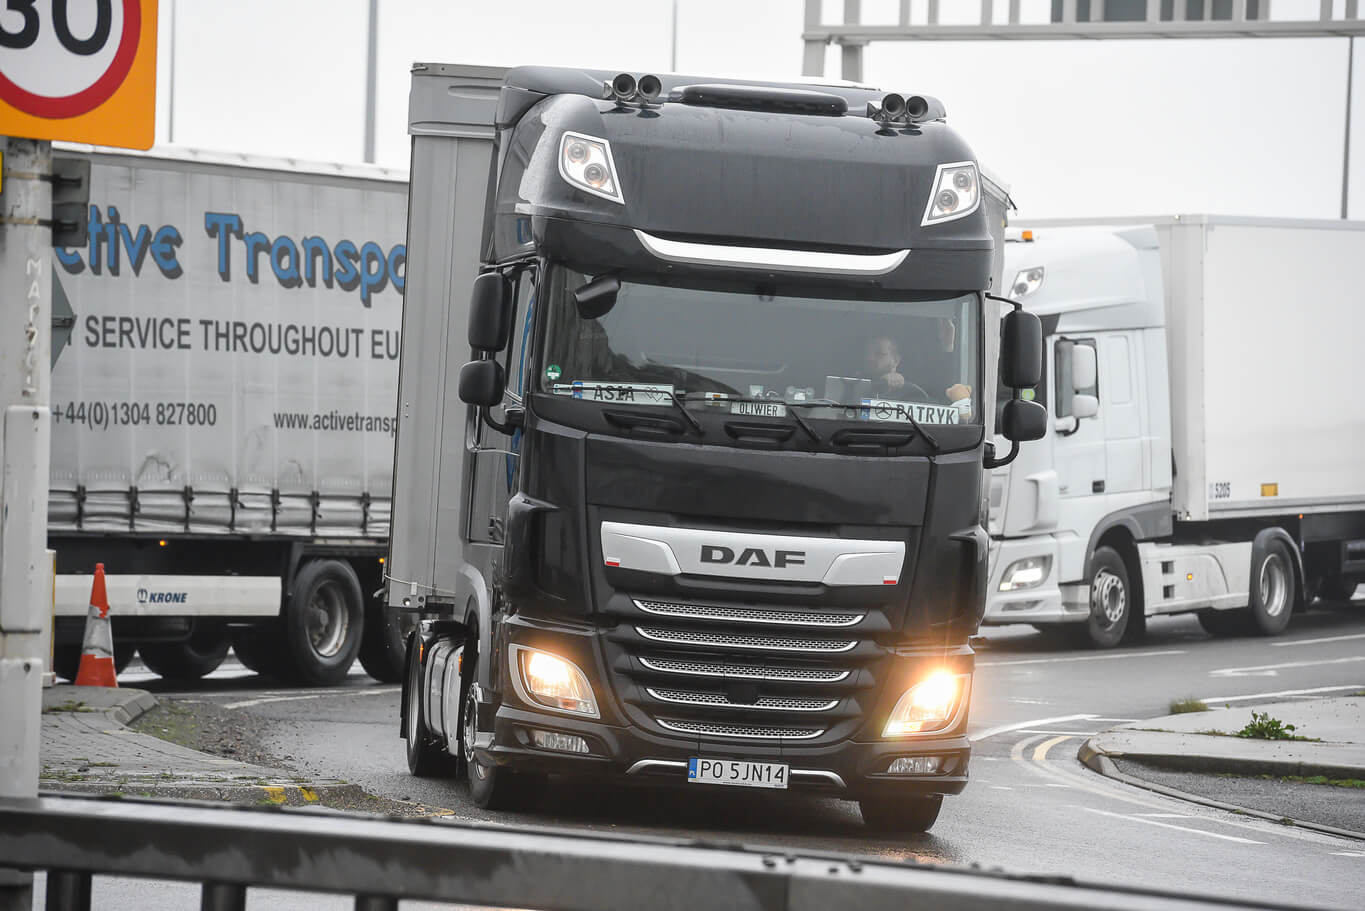 Lorry queues began to form in Kent after France close its border with England